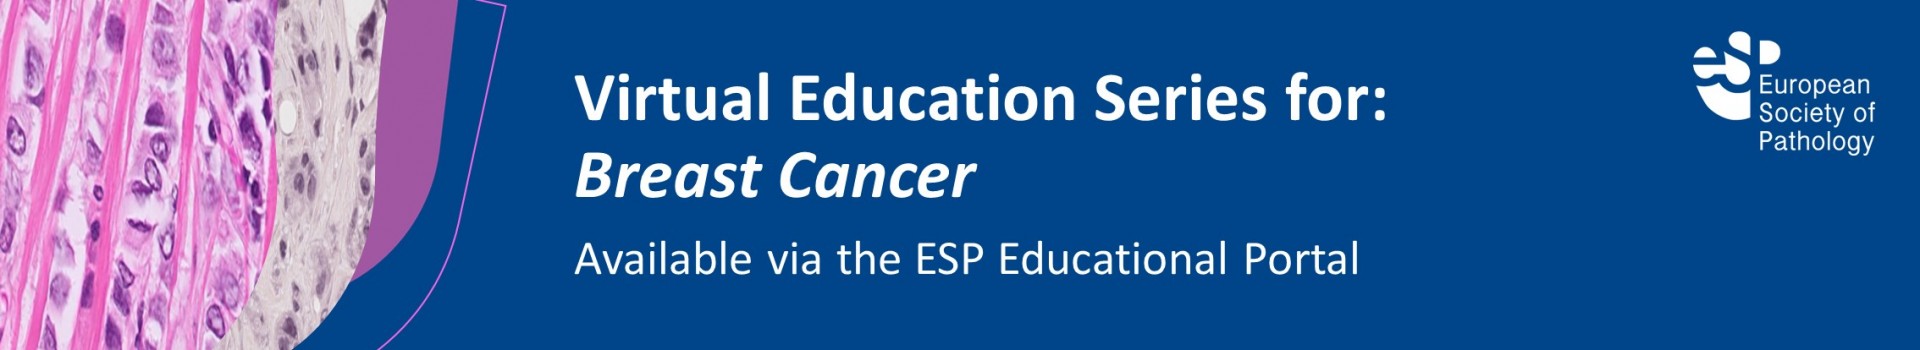 Virtual Education Series for Breast Cancer